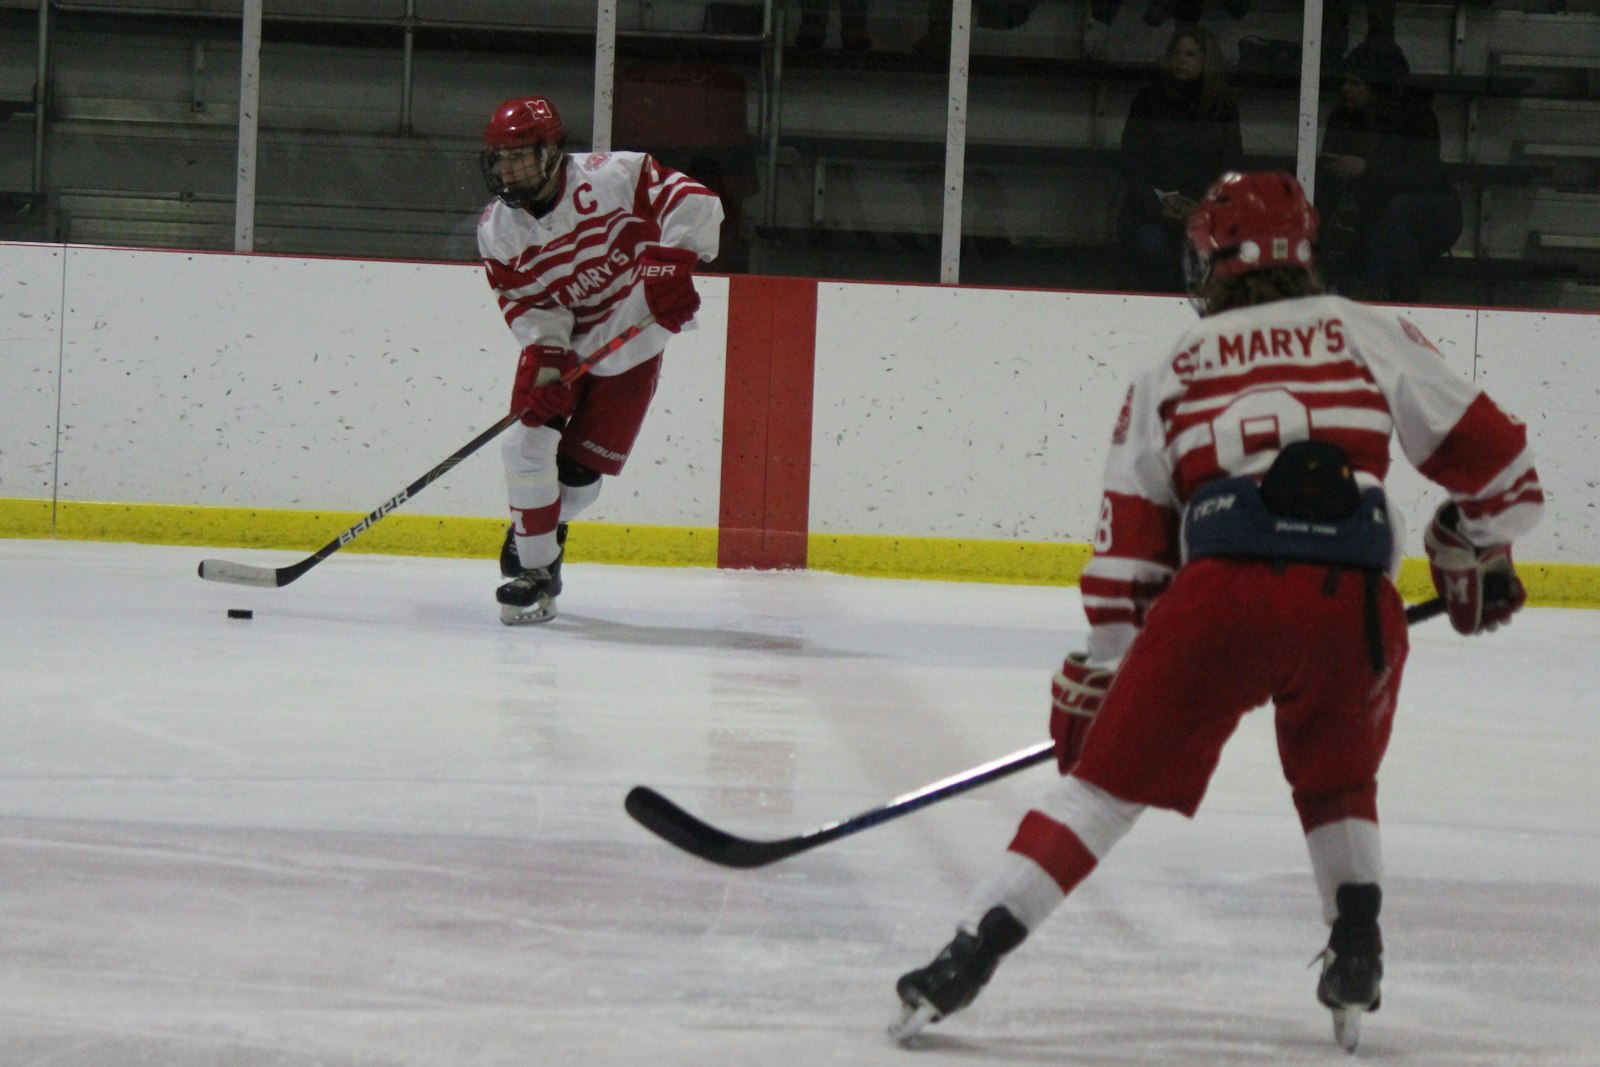 Team captain Dylan Magdich spots St. Mary’s teammate Reiss Williams open for a pass. Williams later scored a power-play goal, pacing the Eaglets to a 2-0 victory over Brother Rice.